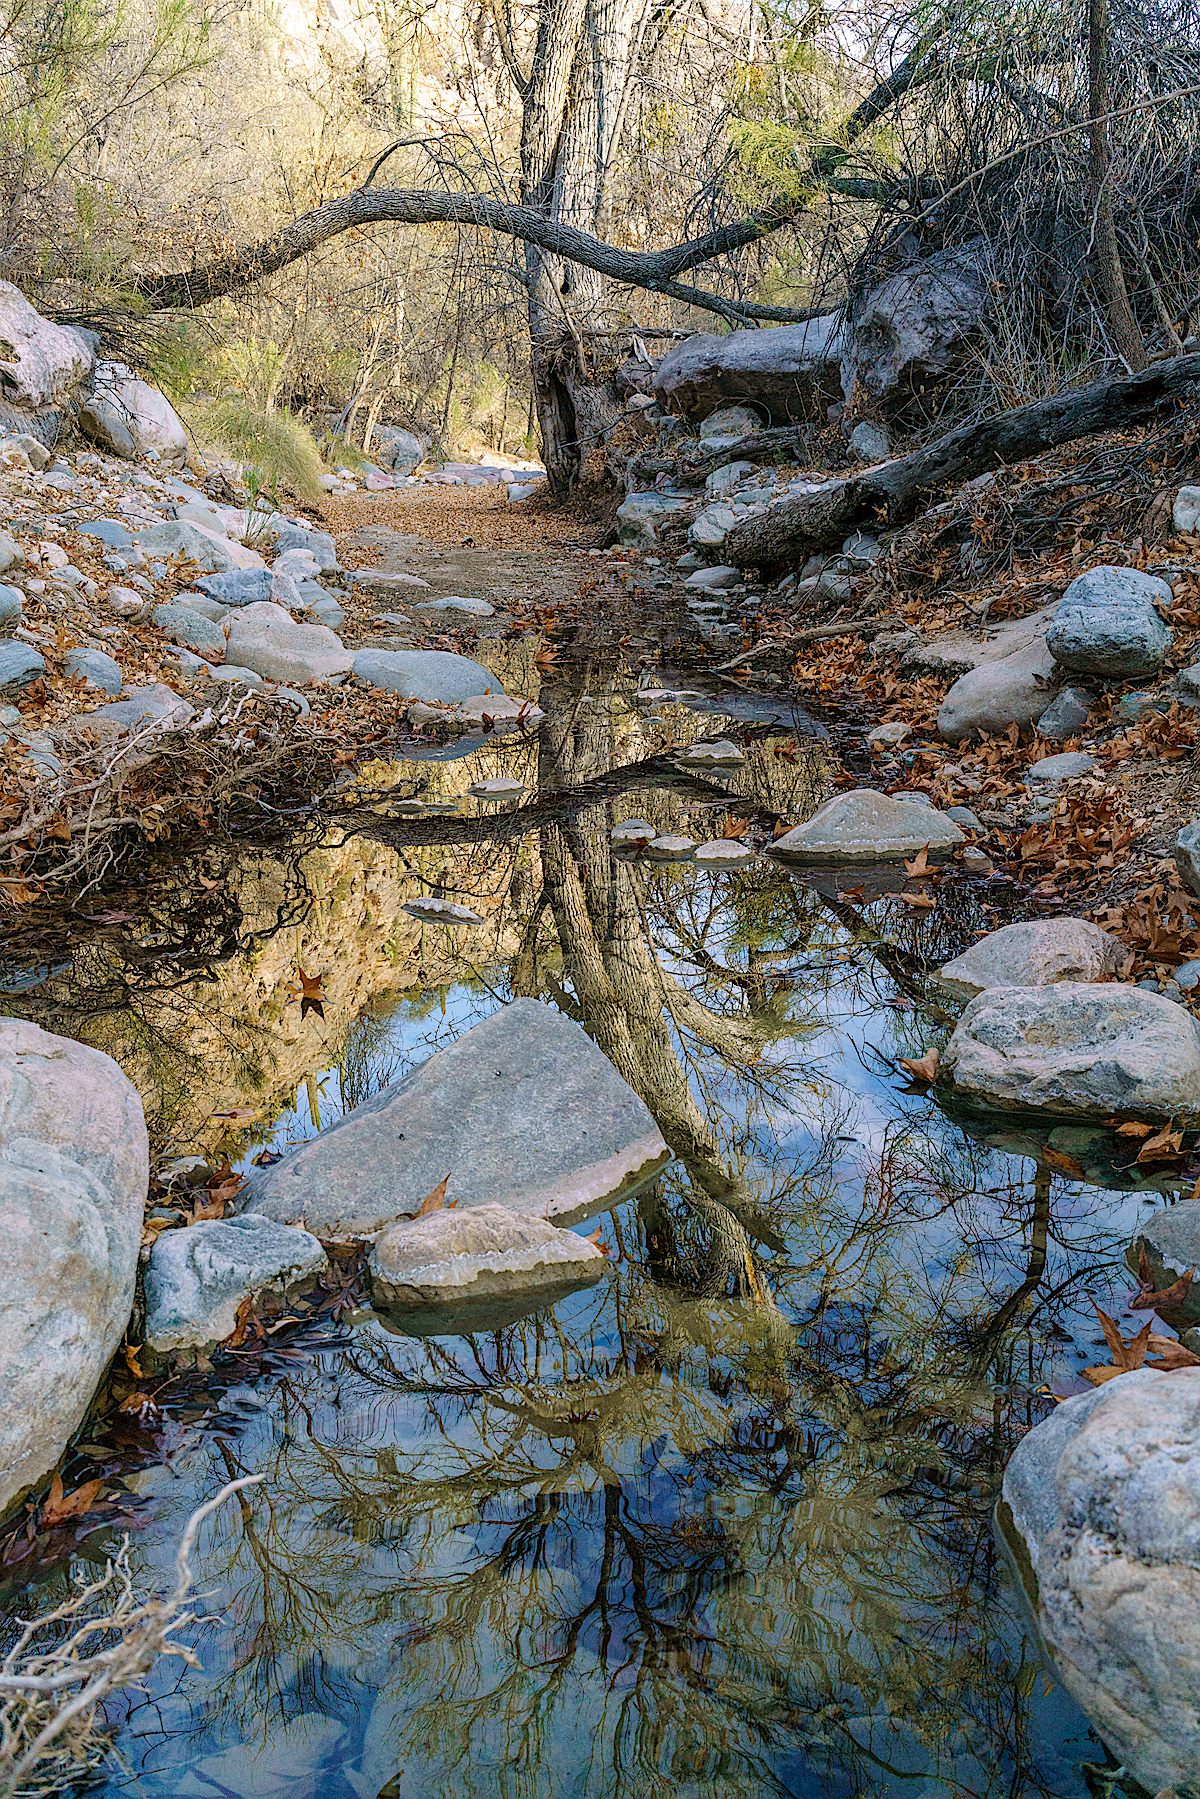 A reflection at the end of the surface water below the spring in Edgar Canyon. January 2018.